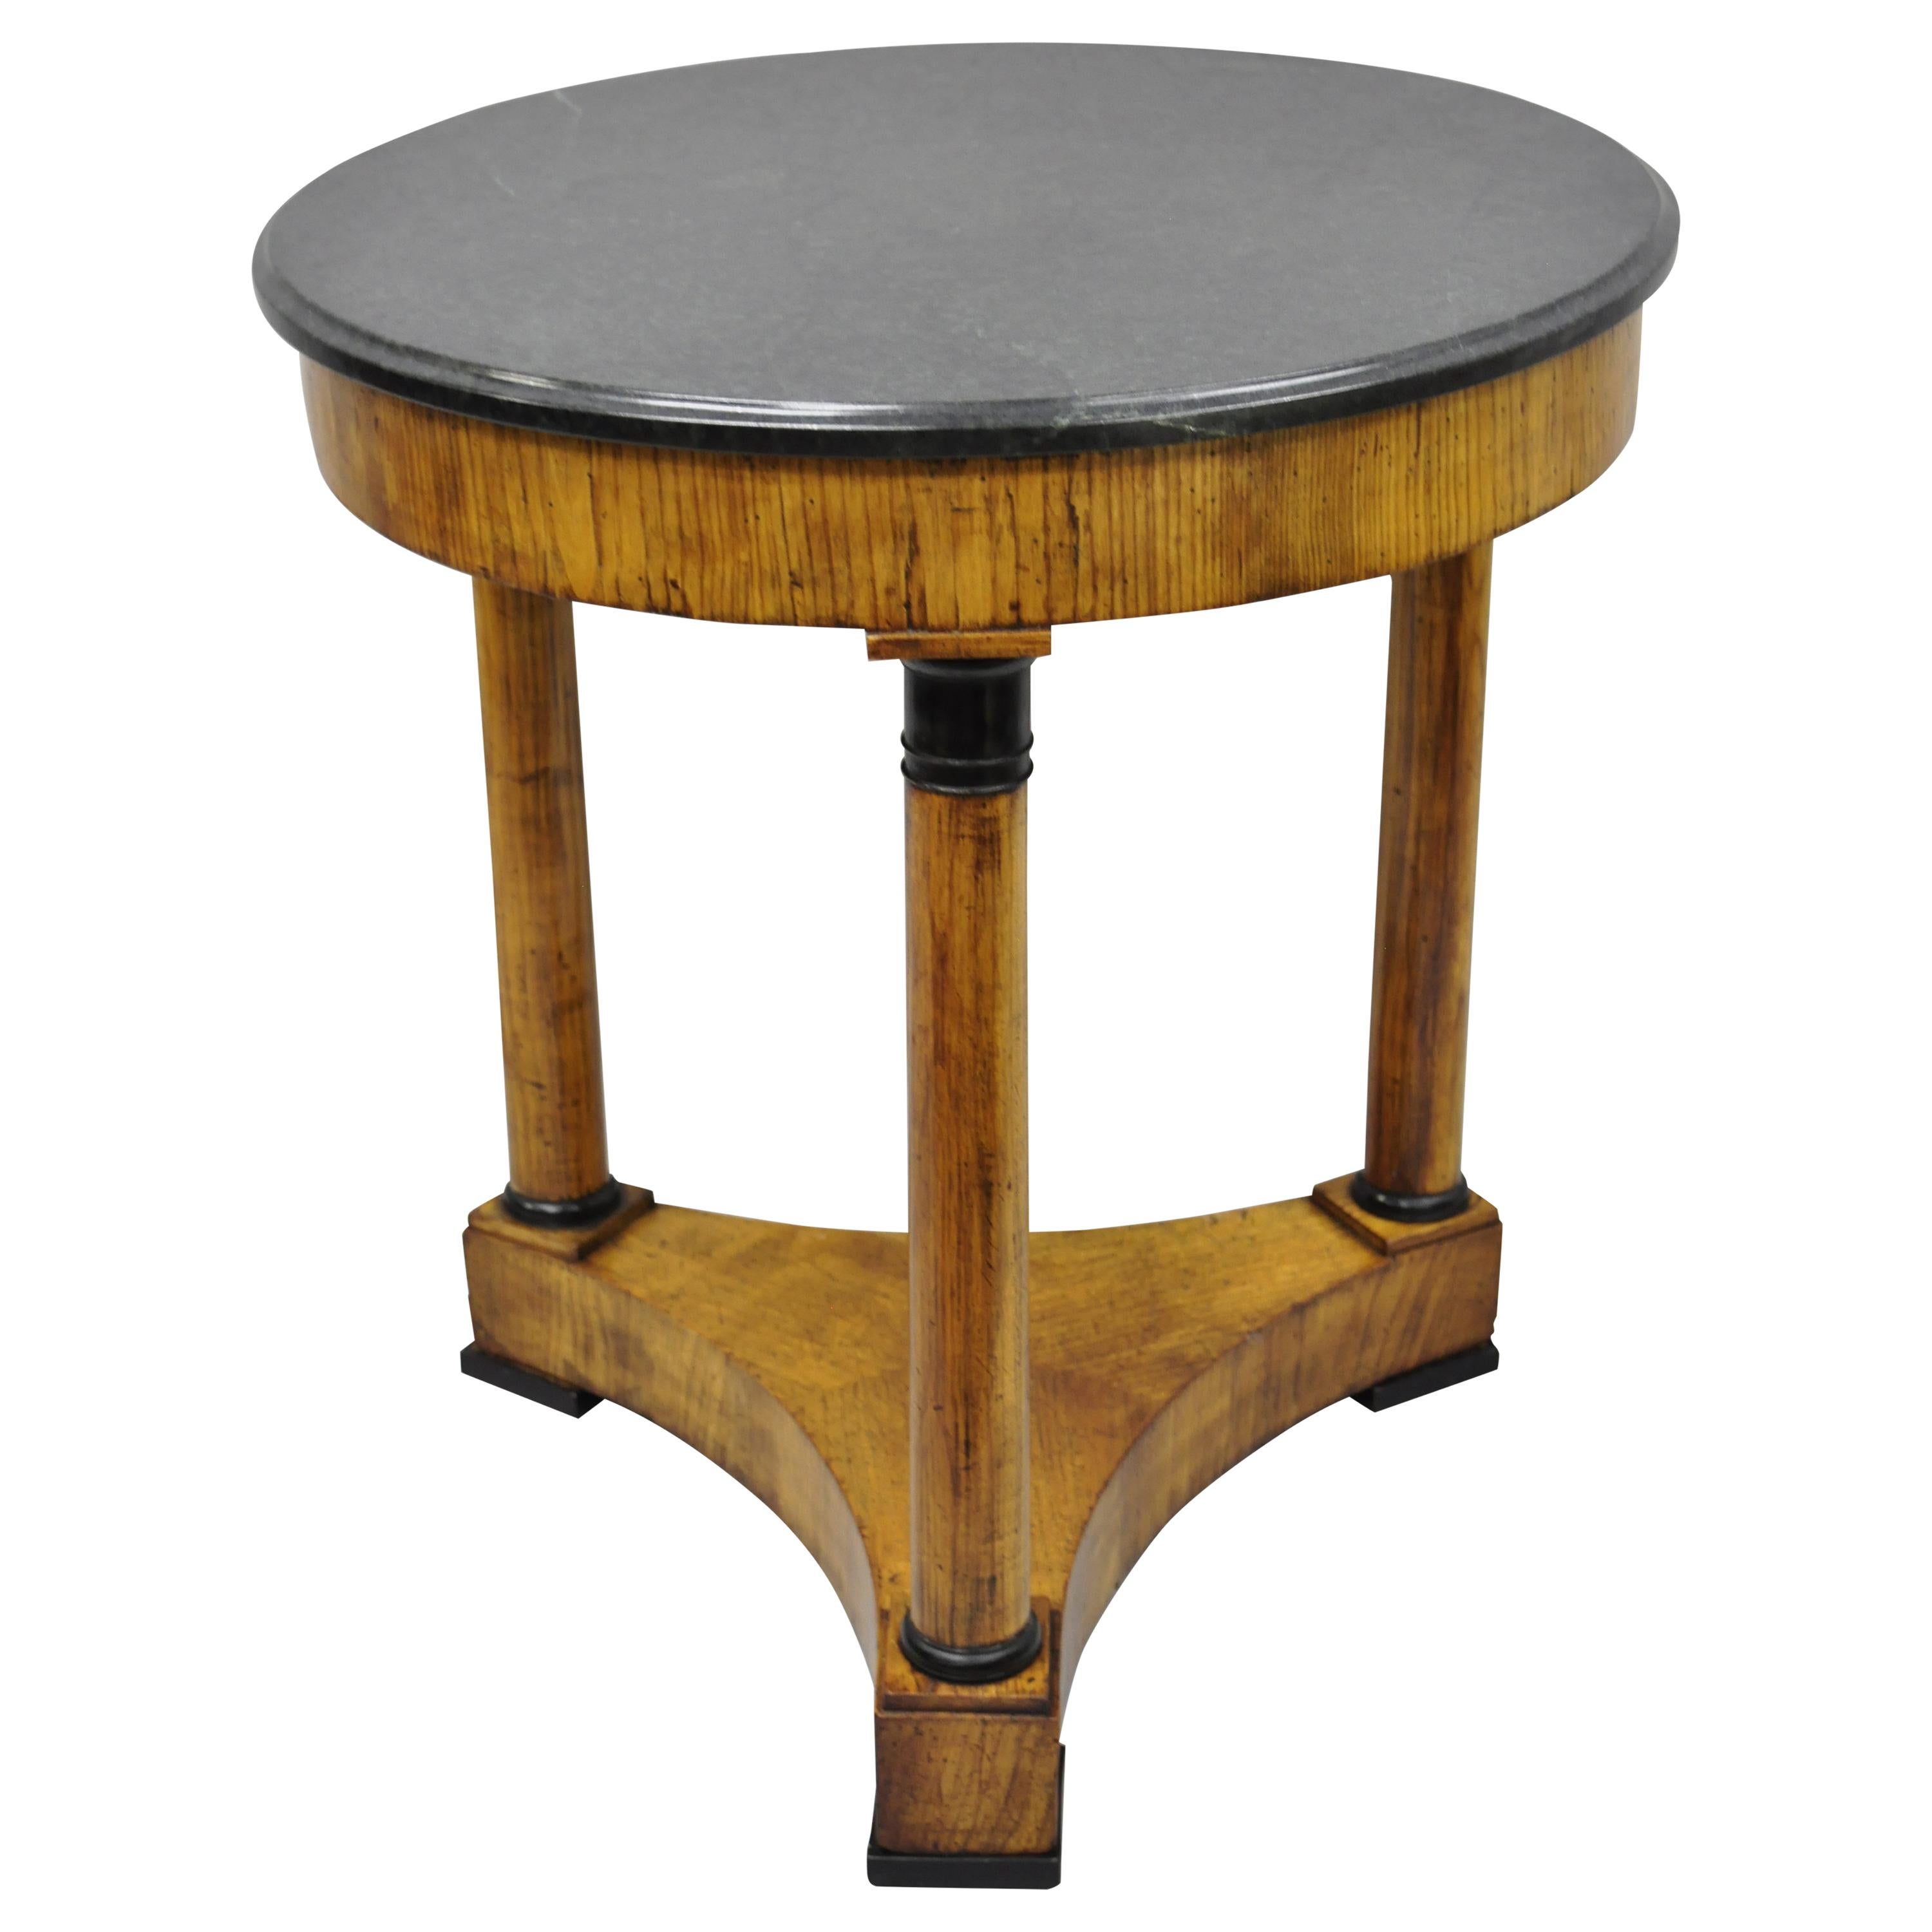 19th Century French Empire Style Round Marble-Top Center Table